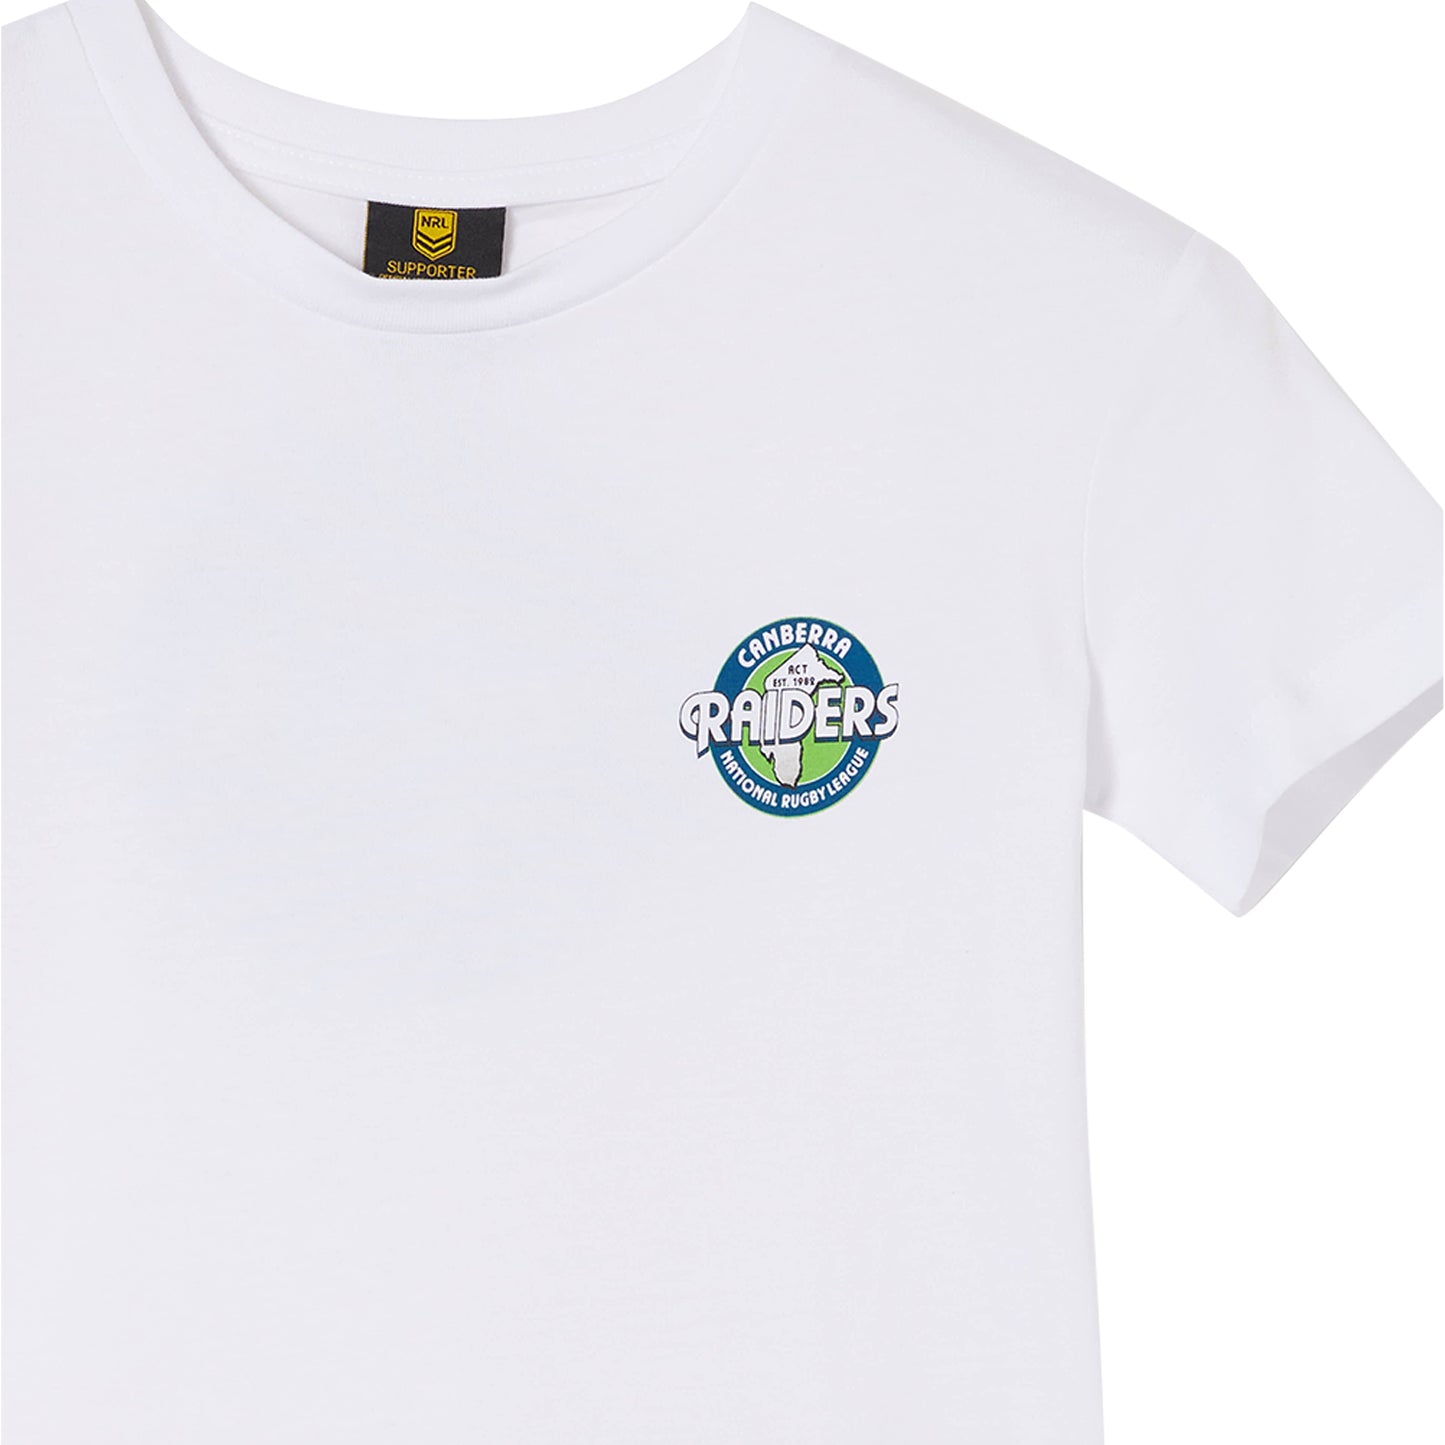 Canberra Raiders Youth Zephyr Tee